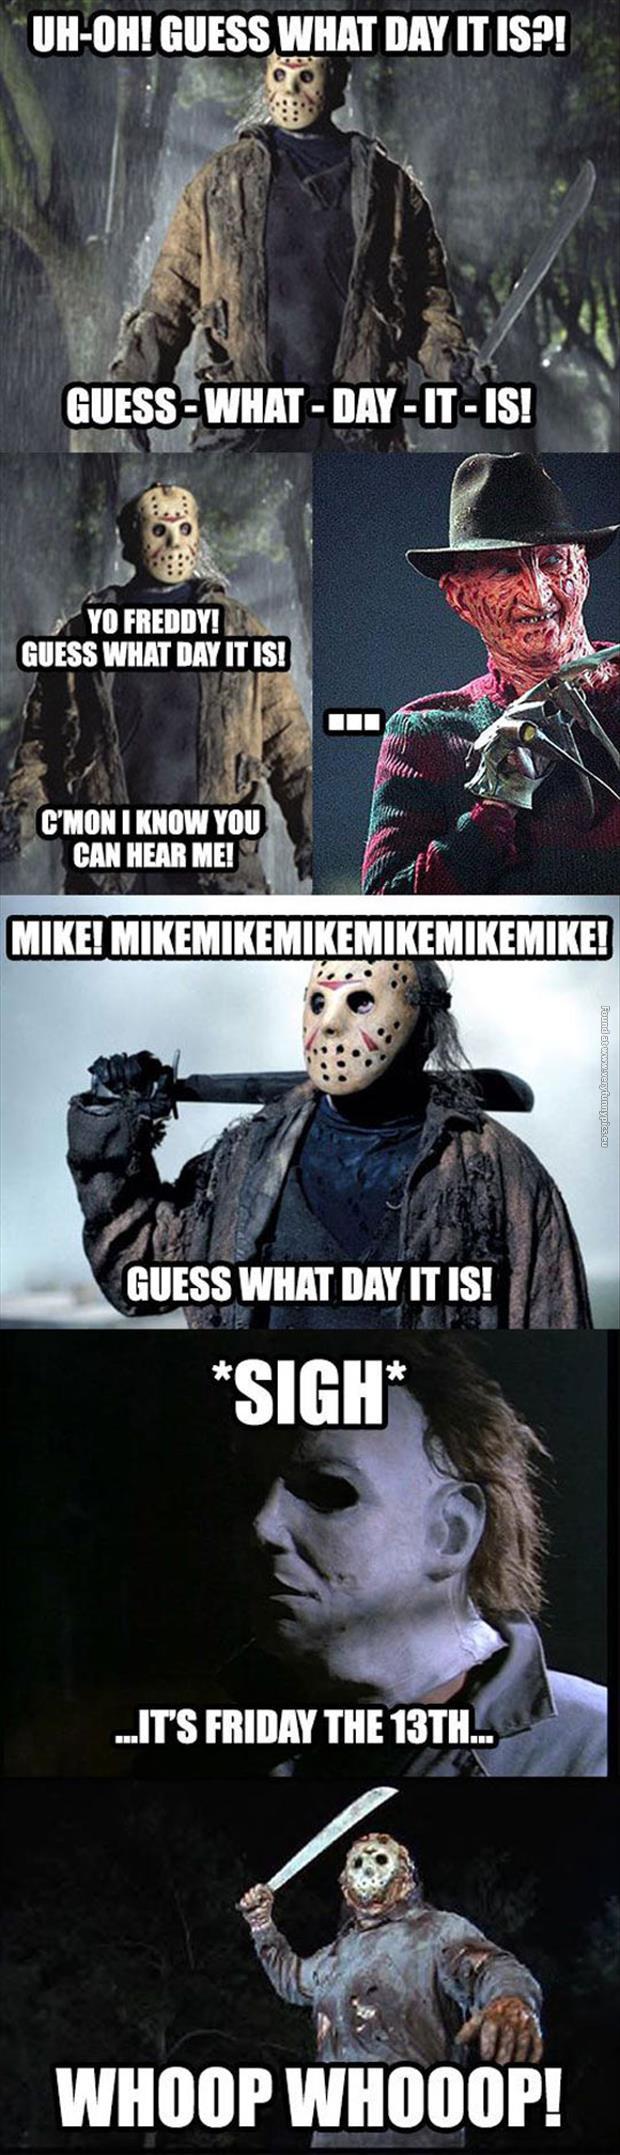 funny pics friday the 13th